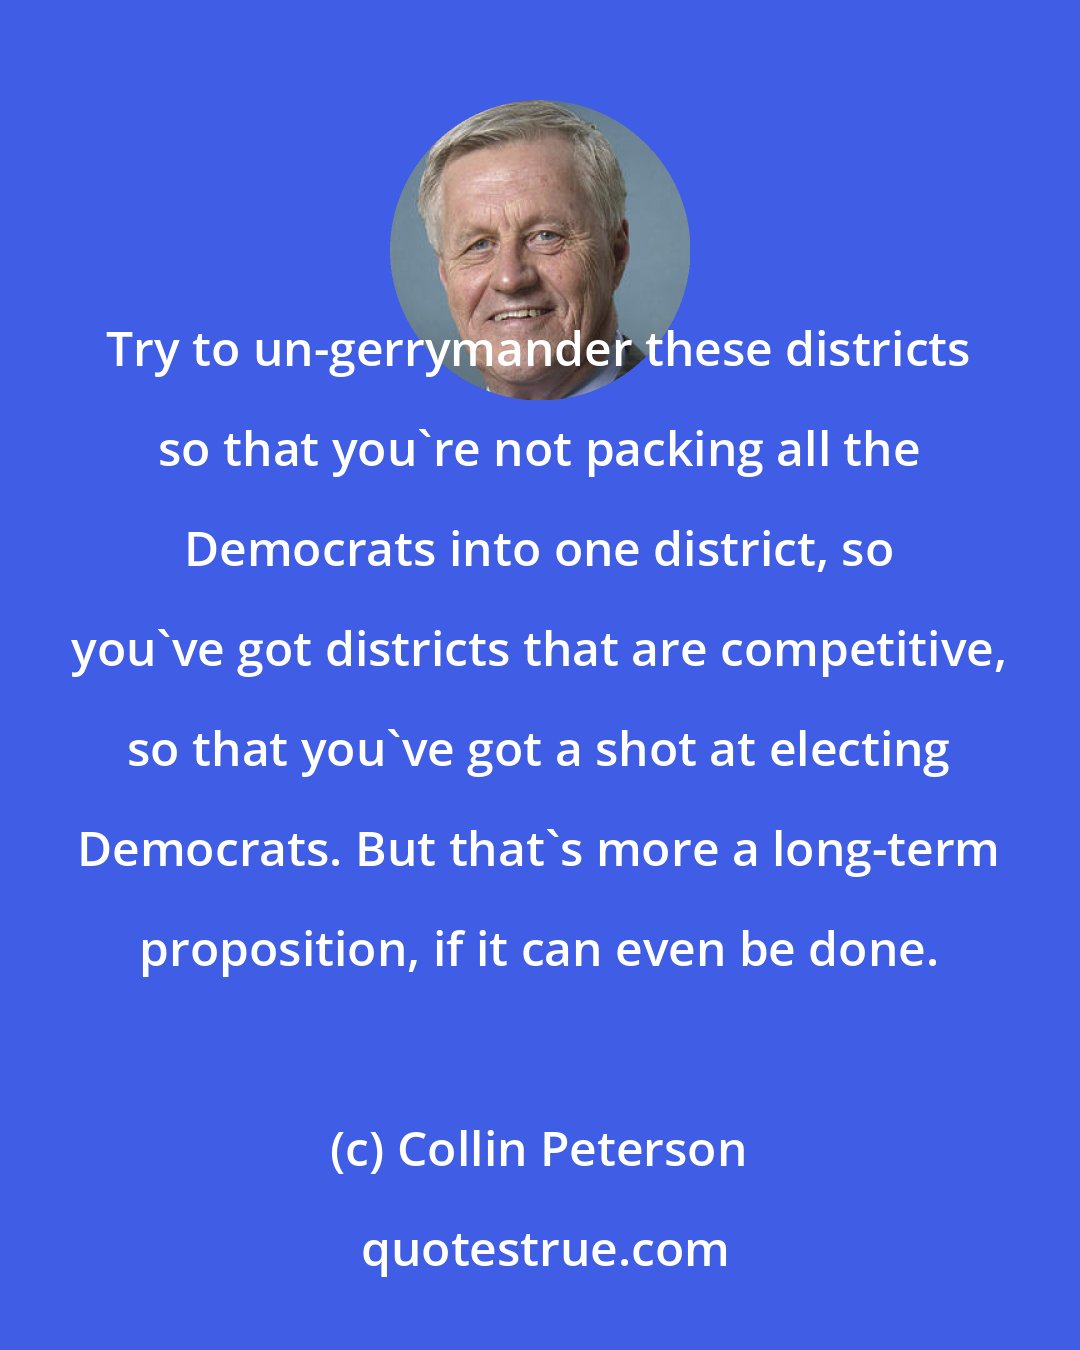 Collin Peterson: Try to un-gerrymander these districts so that you're not packing all the Democrats into one district, so you've got districts that are competitive, so that you've got a shot at electing Democrats. But that's more a long-term proposition, if it can even be done.